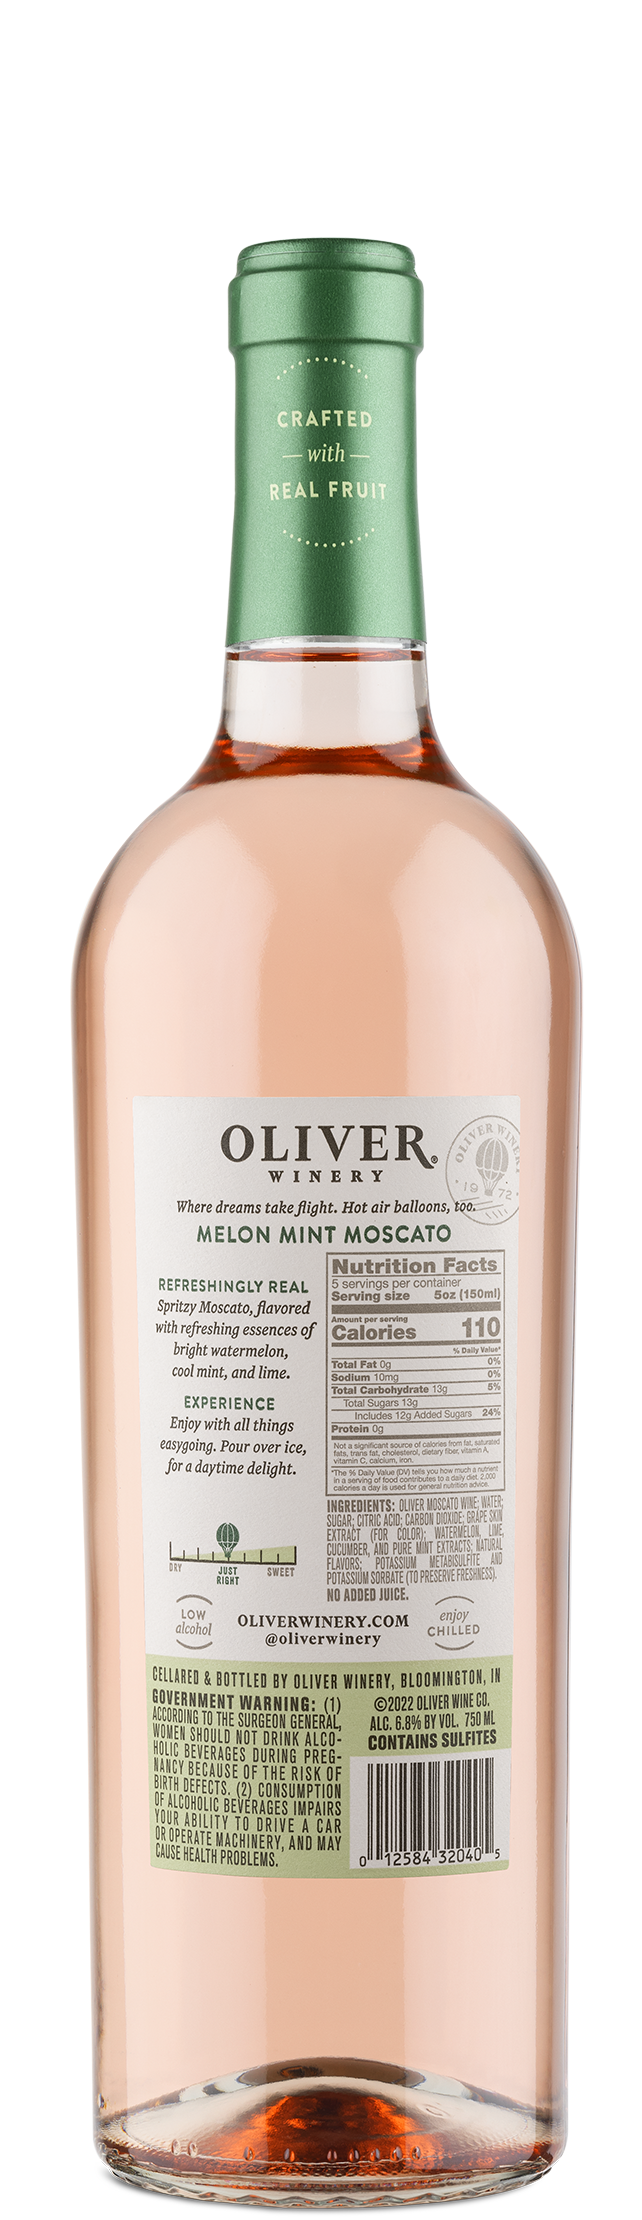 Melon Mint Moscato, new from Oliver Winery, is a low alcohol wine with natural fruit flavors and extracts. 